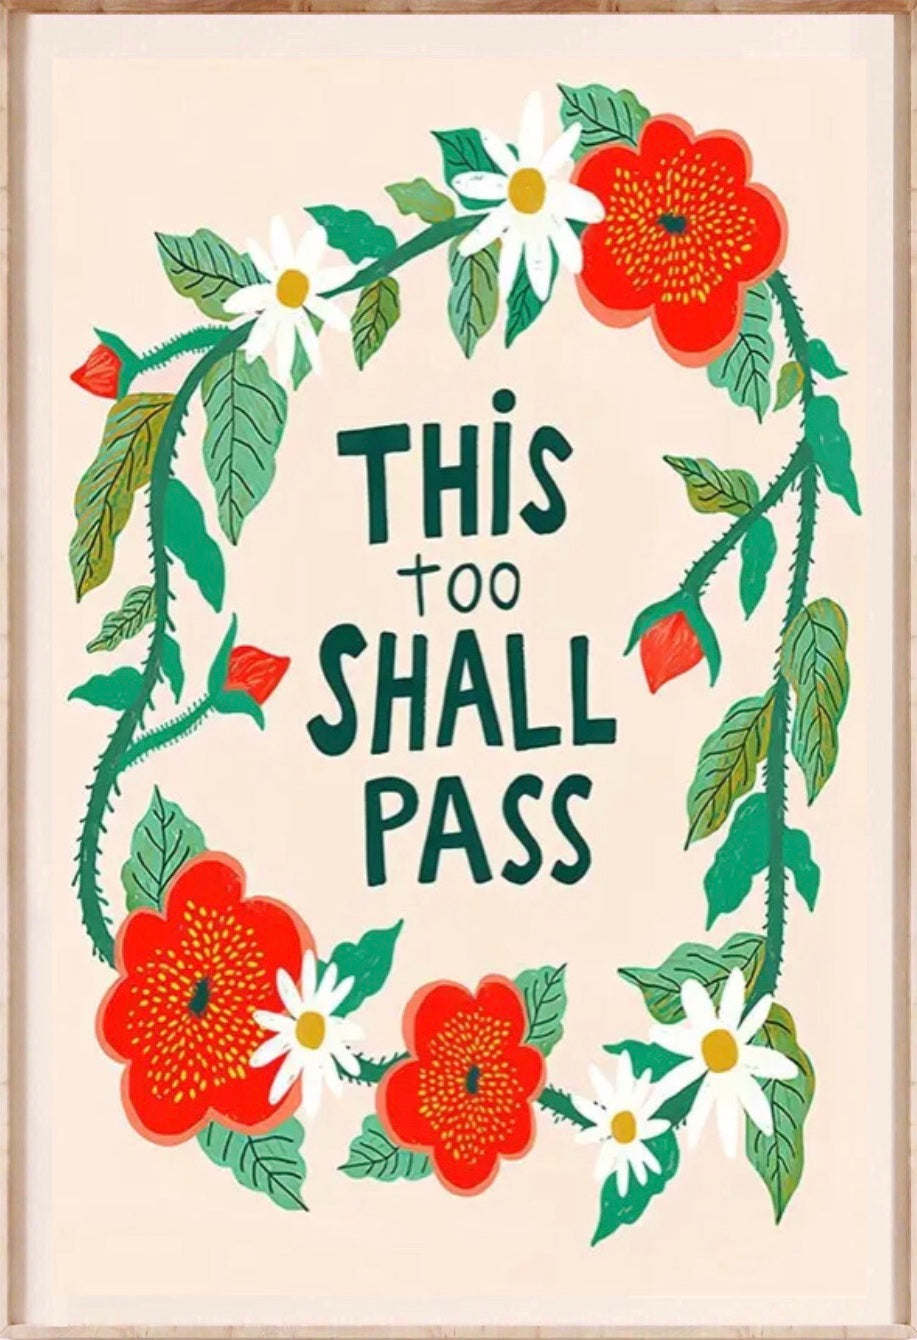 " this too shall pass " poster